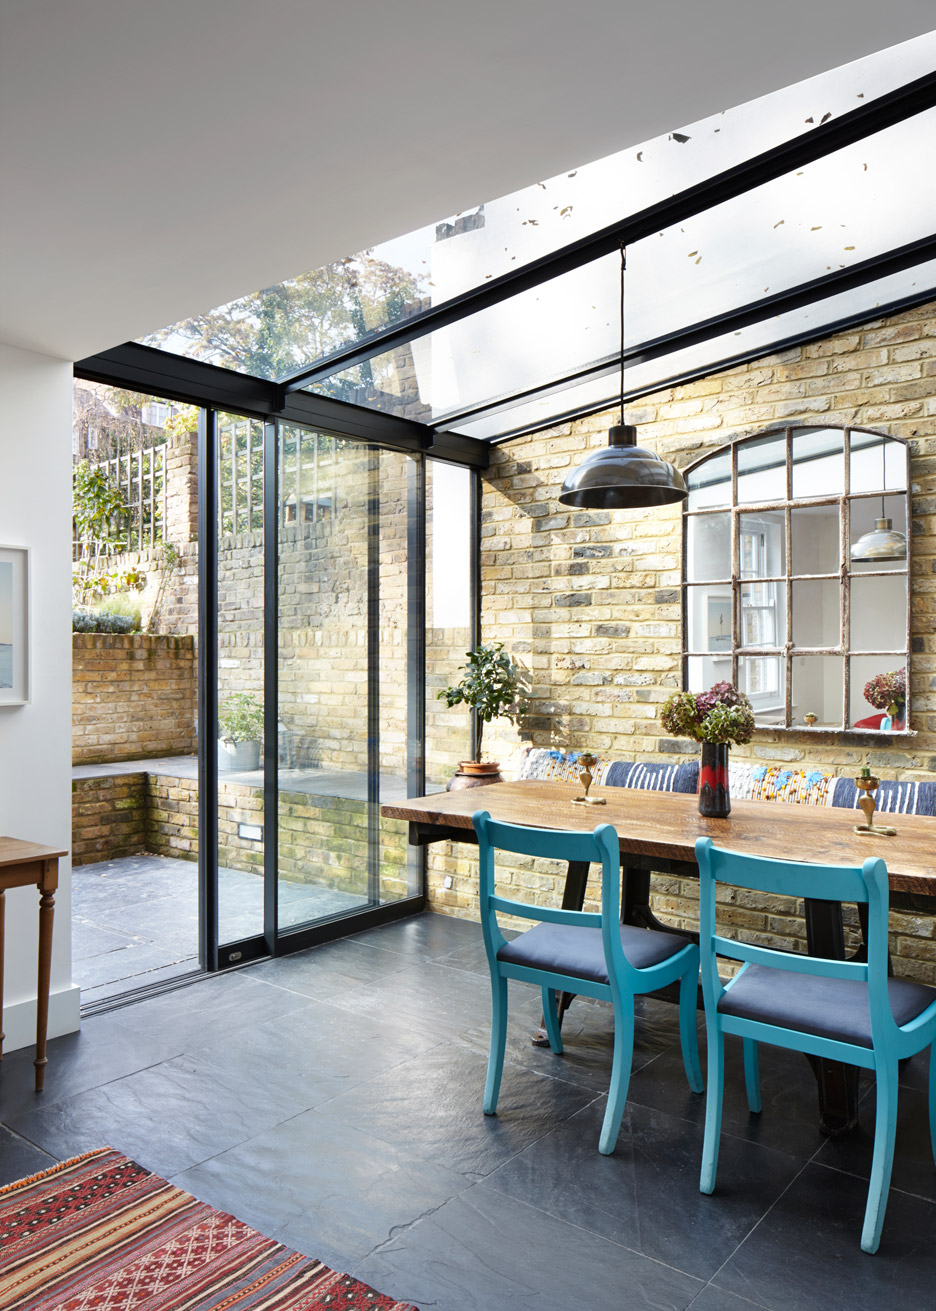 Mile End house extension by HÛT